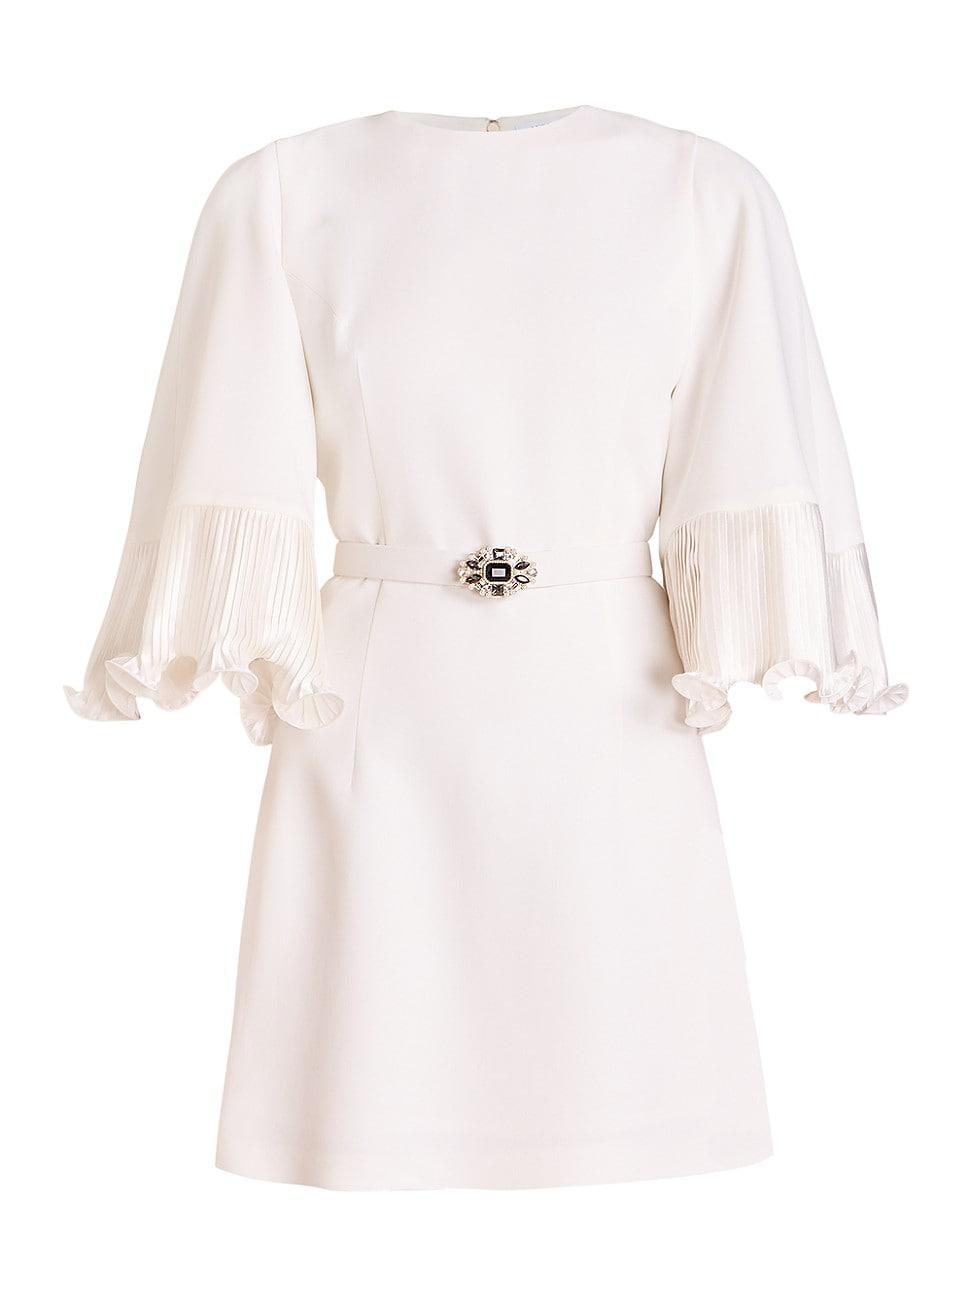 Andrew Gn Crepe Belted Frill Dress in White | Lyst